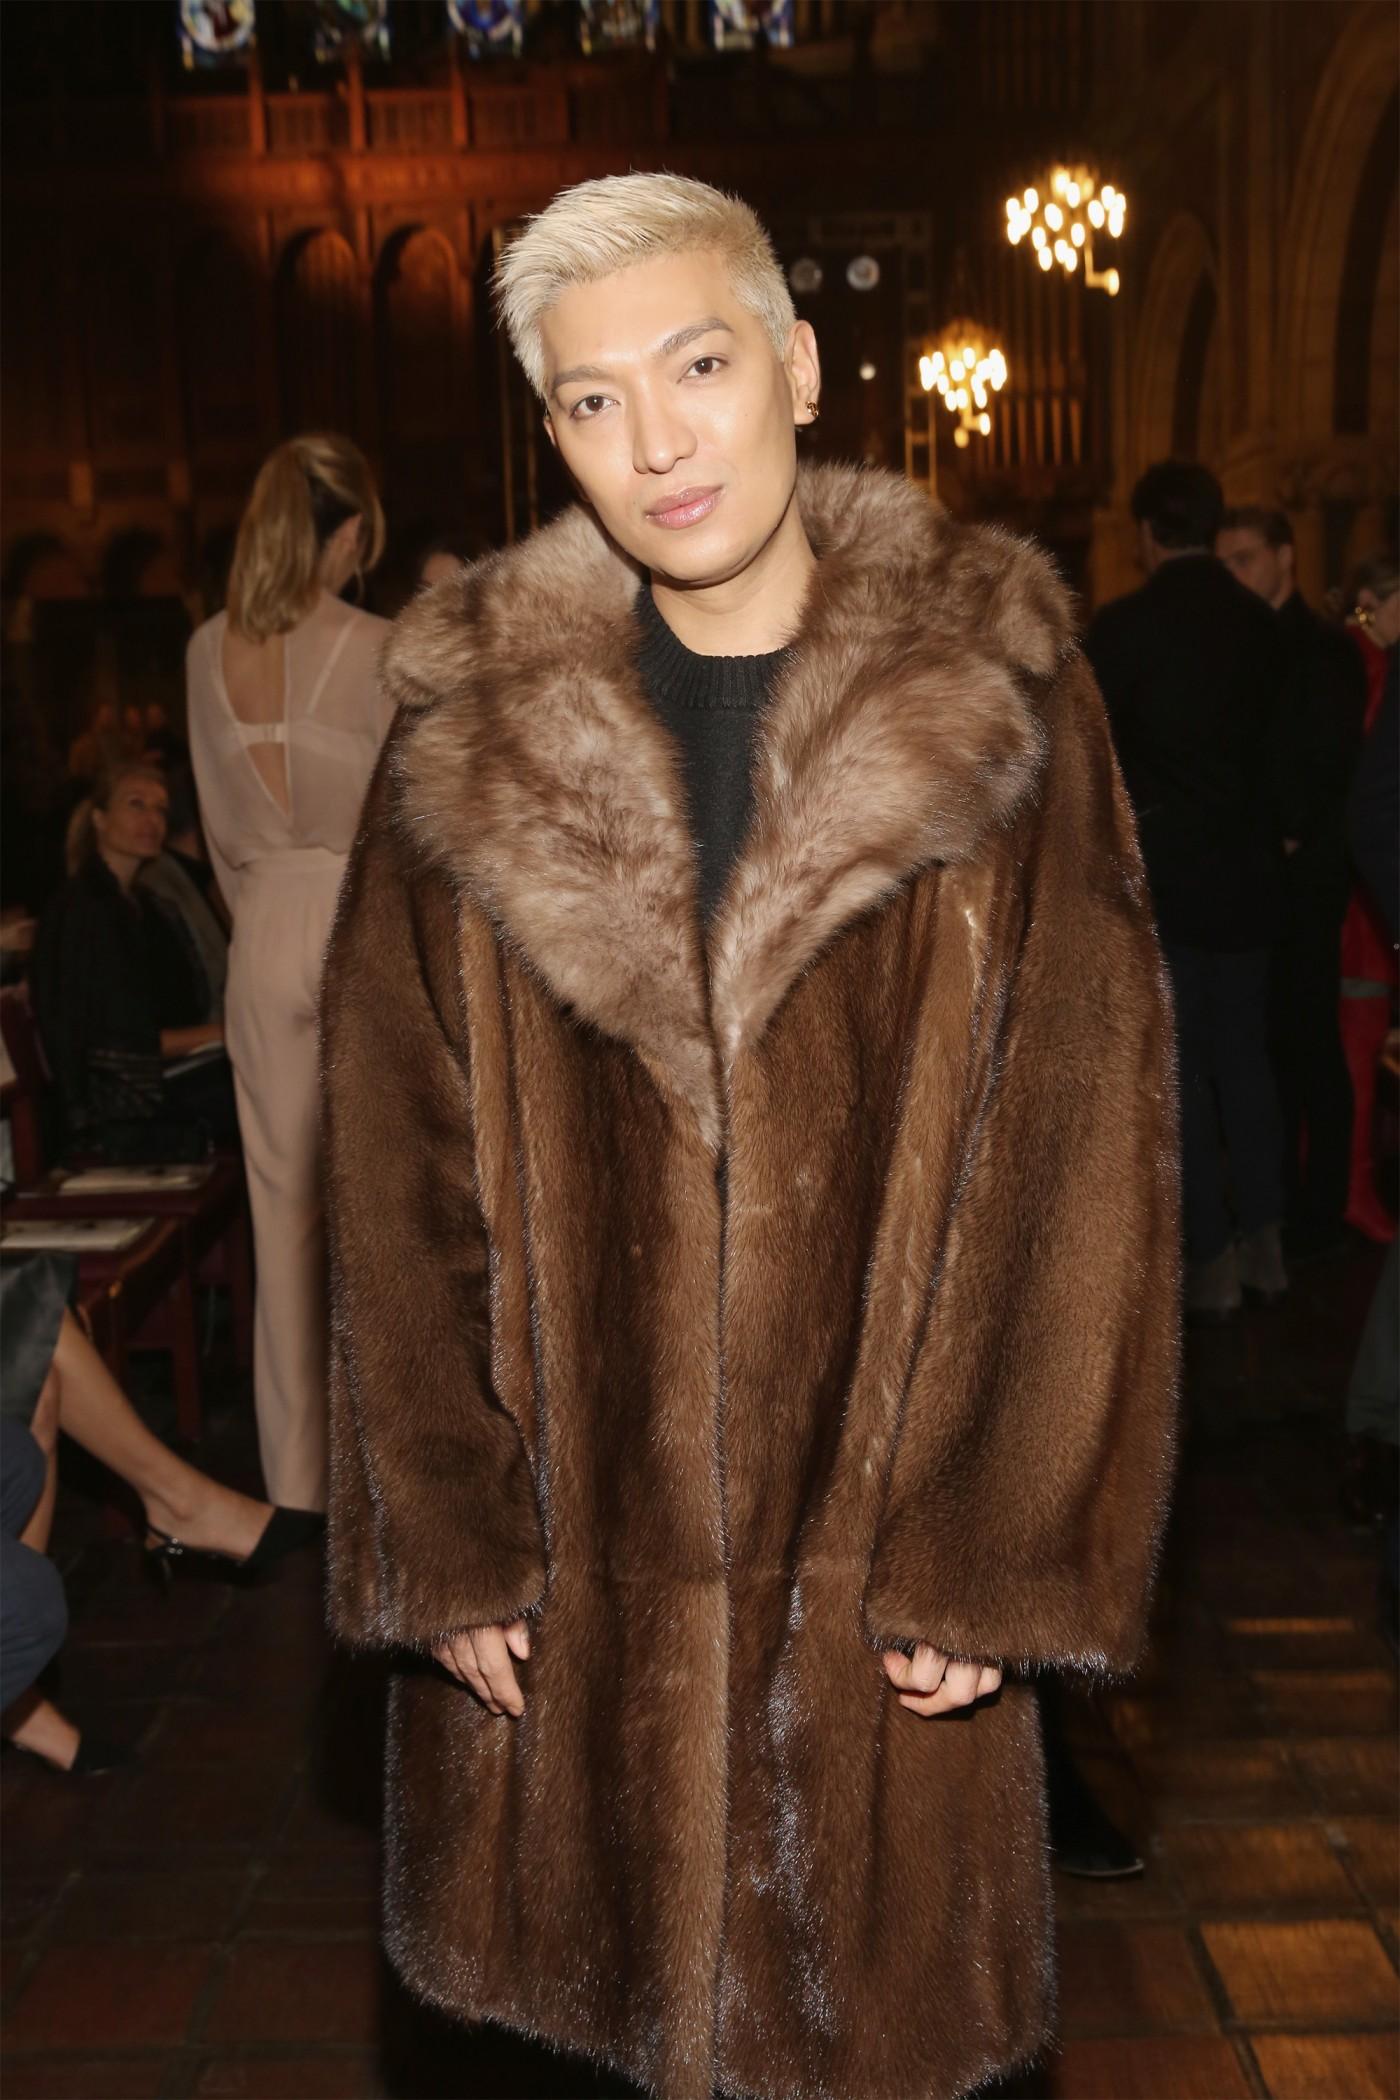 bryanboy on X: My Swedish husband told me they haven't had gas